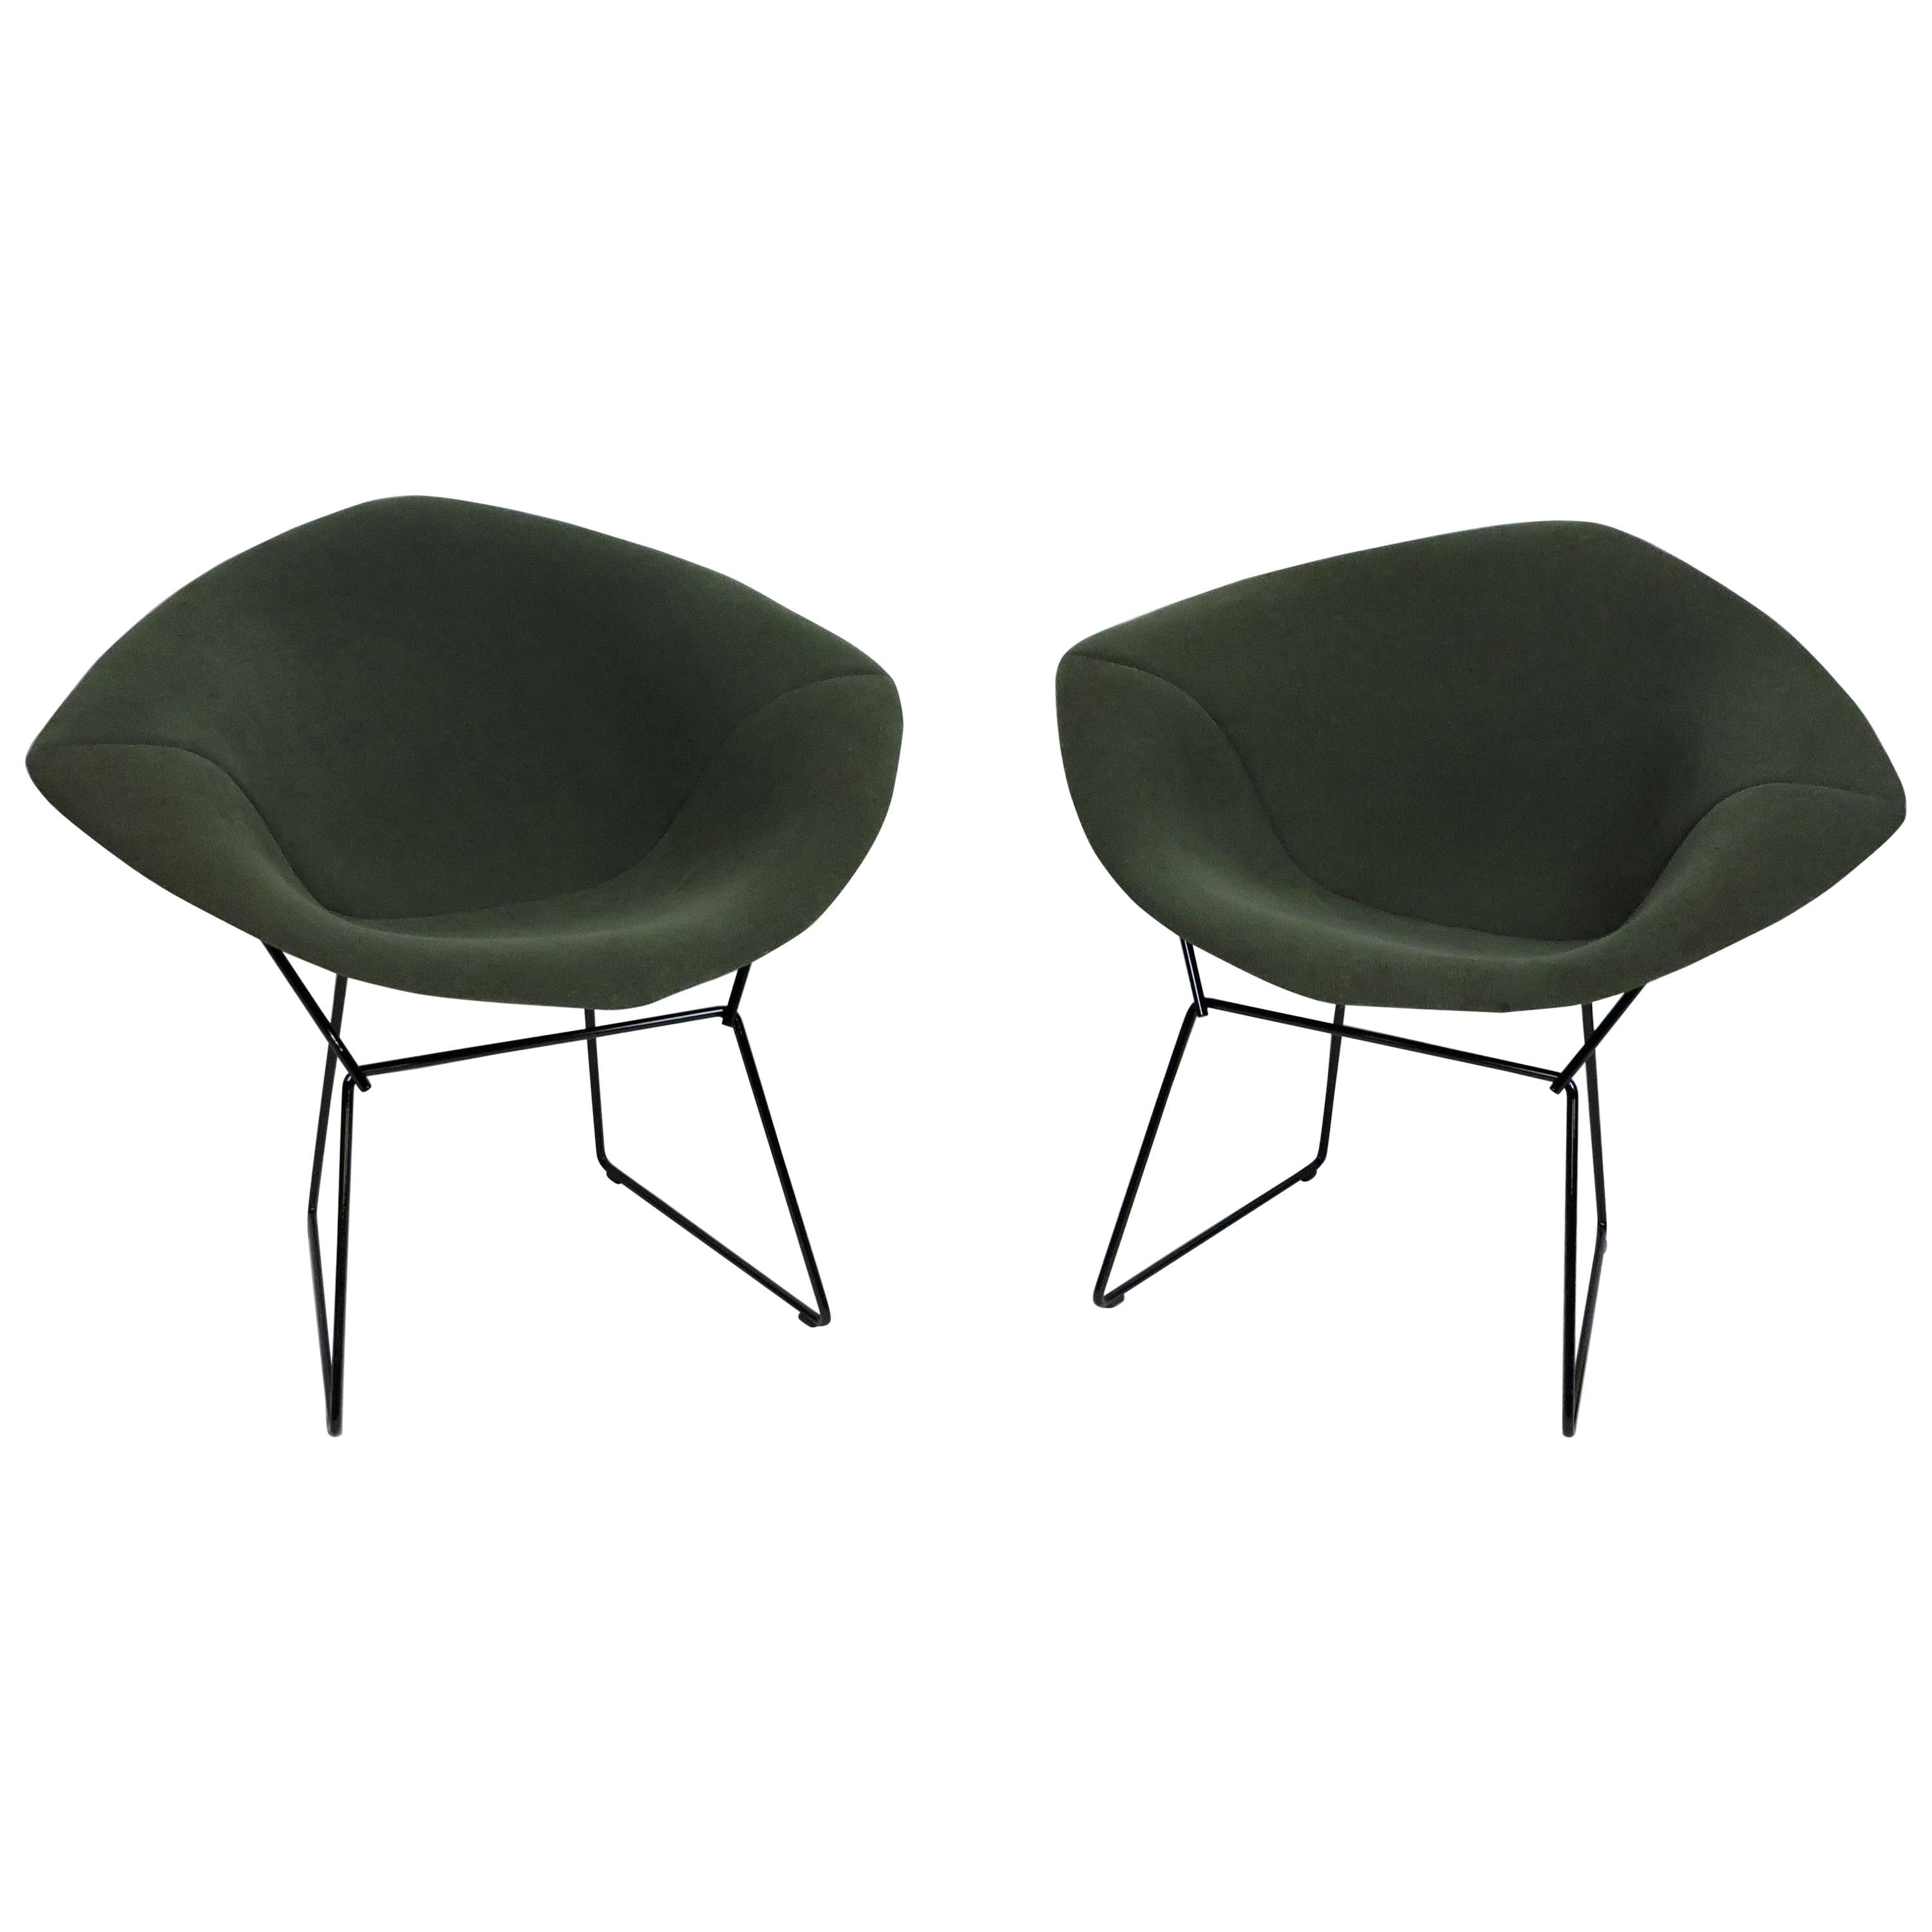 Harry Bertoia for Knoll Diamond Chairs with Full Cover, Labeled, Two Available